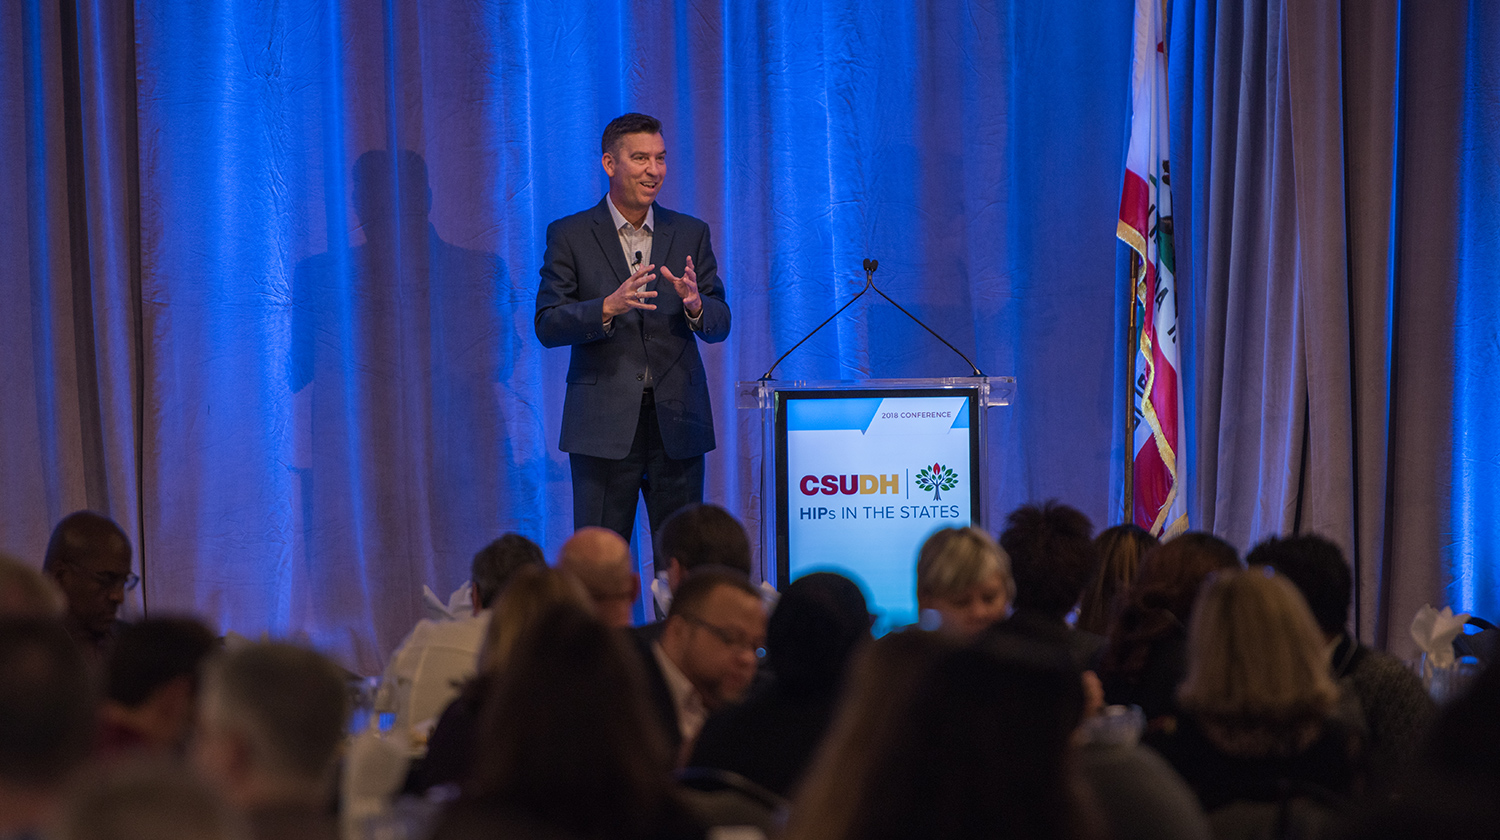 Andrew Ceperley, director of the Silicon Valley Program at Claremont McKenna College, provided the HIPs in the States keynote address.